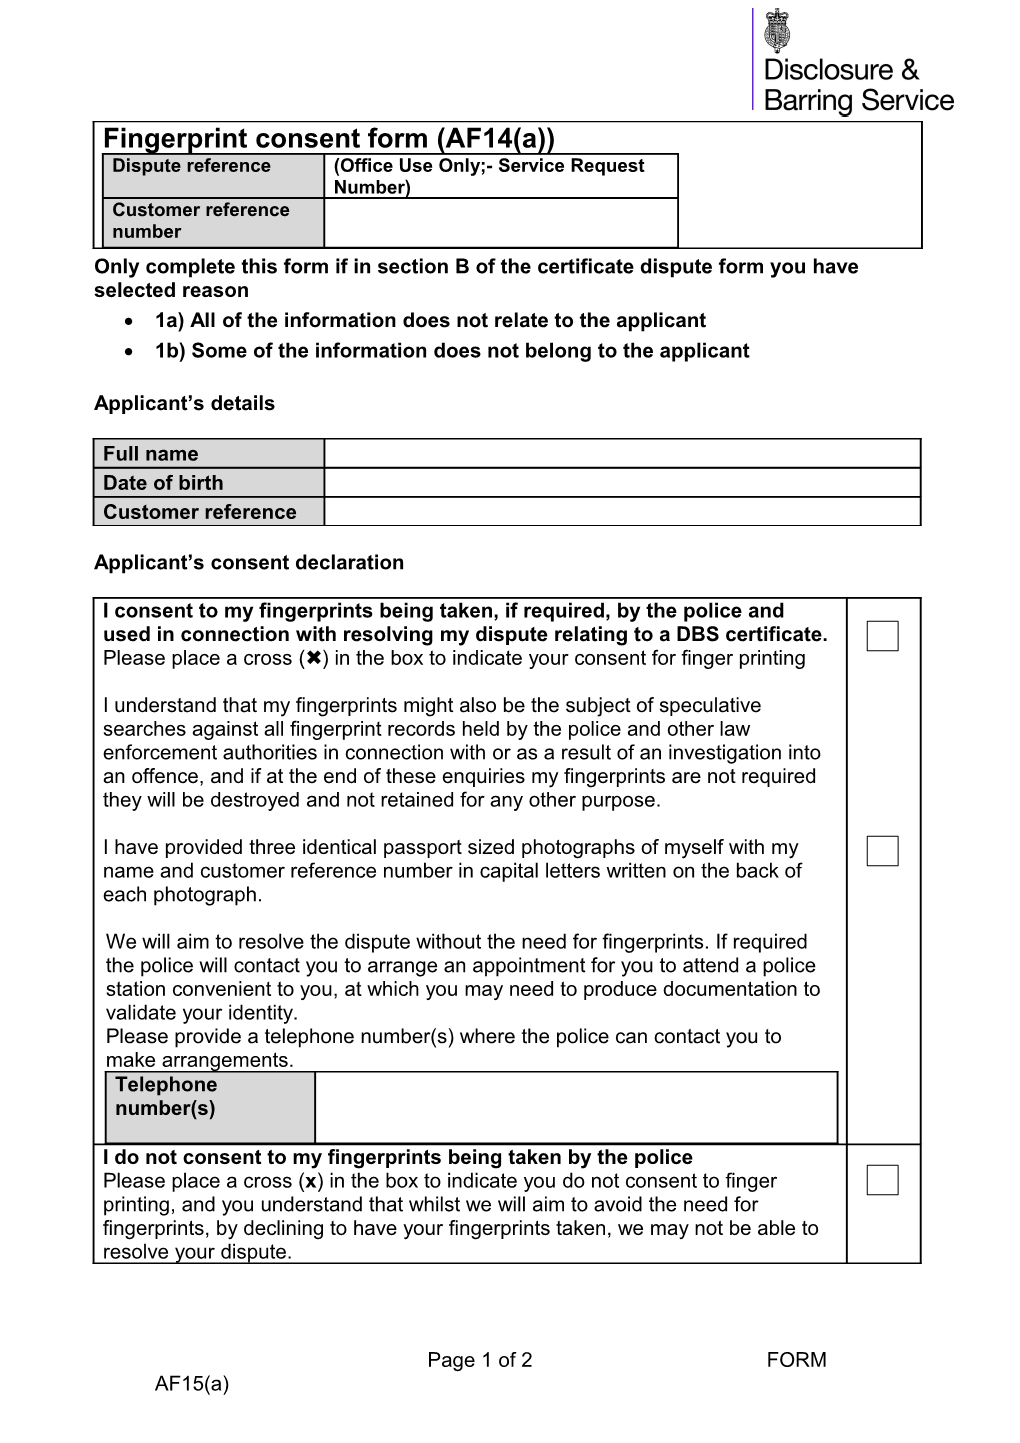 Only Complete This Form If in Section B of the Certificate Dispute Form You Have Selected